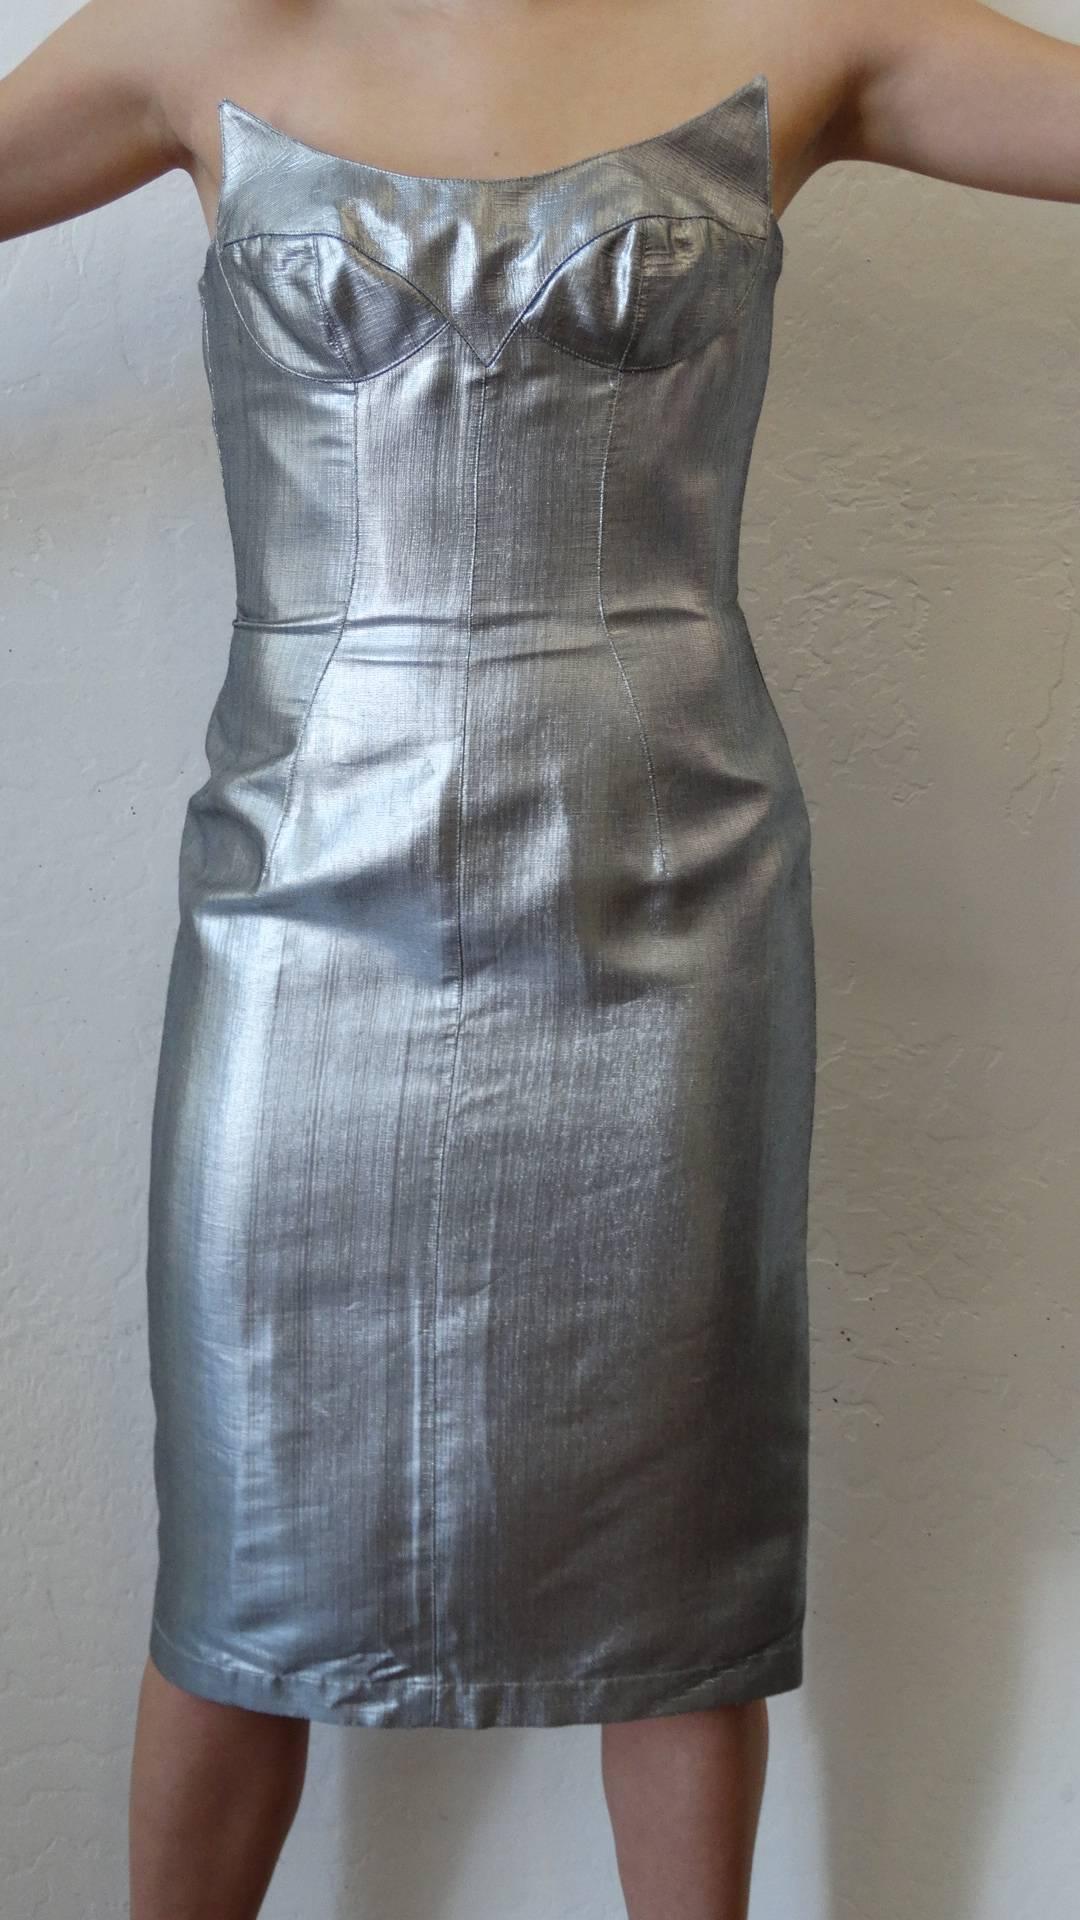  Thierry Mugler Couture Silver Sculpture Dress, Spring 1989 In Excellent Condition For Sale In Scottsdale, AZ